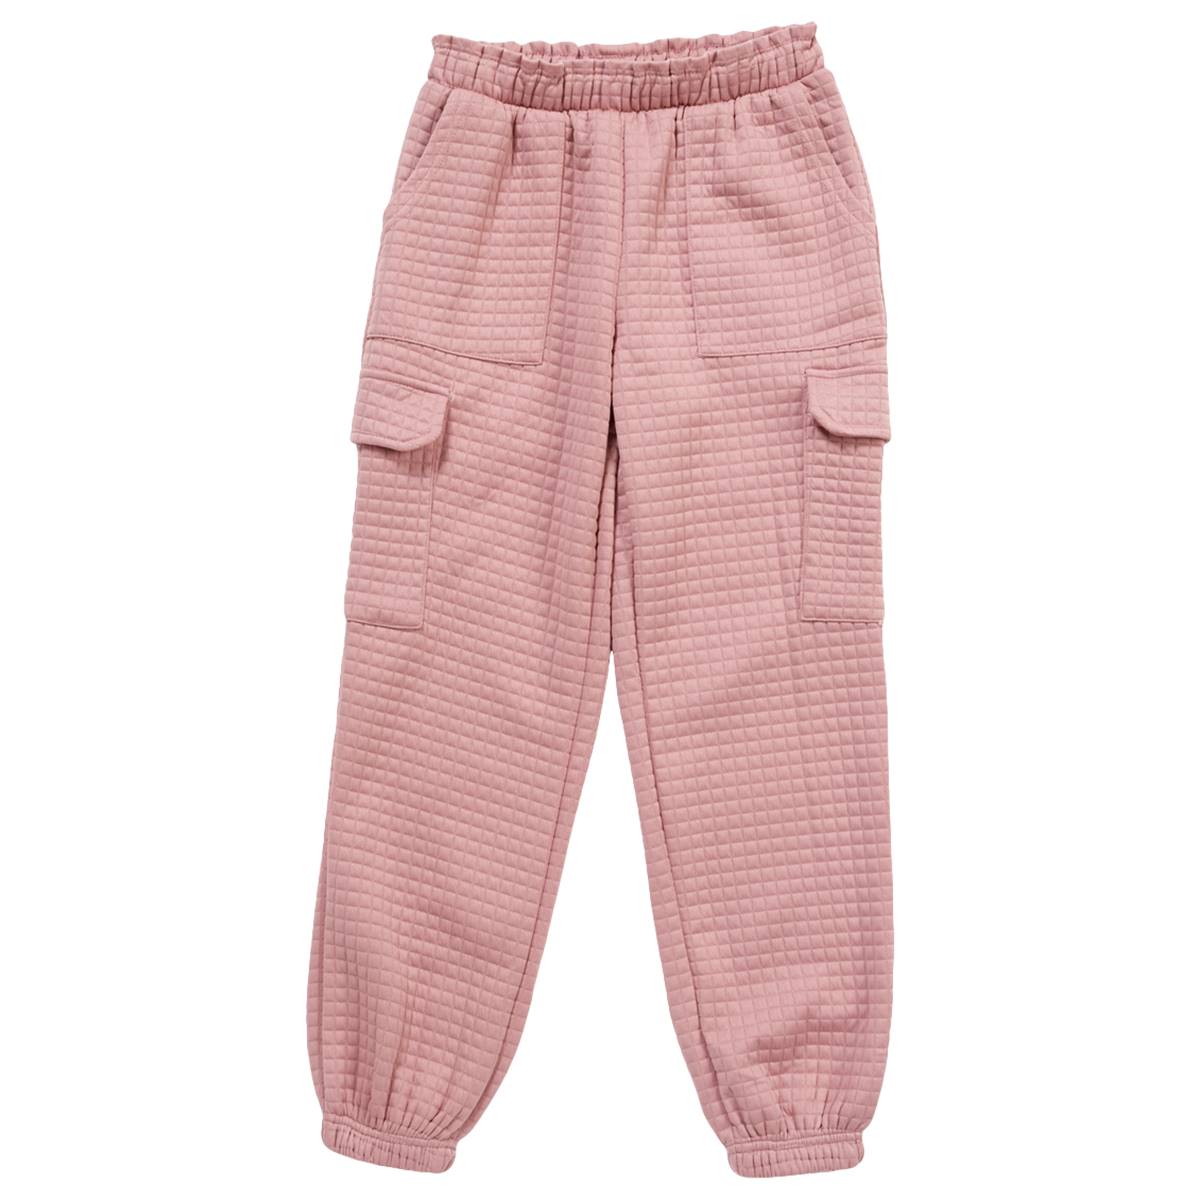 Girls (7-16) Jolie & Joy Cargo Quilted Joggers Pants - Rose